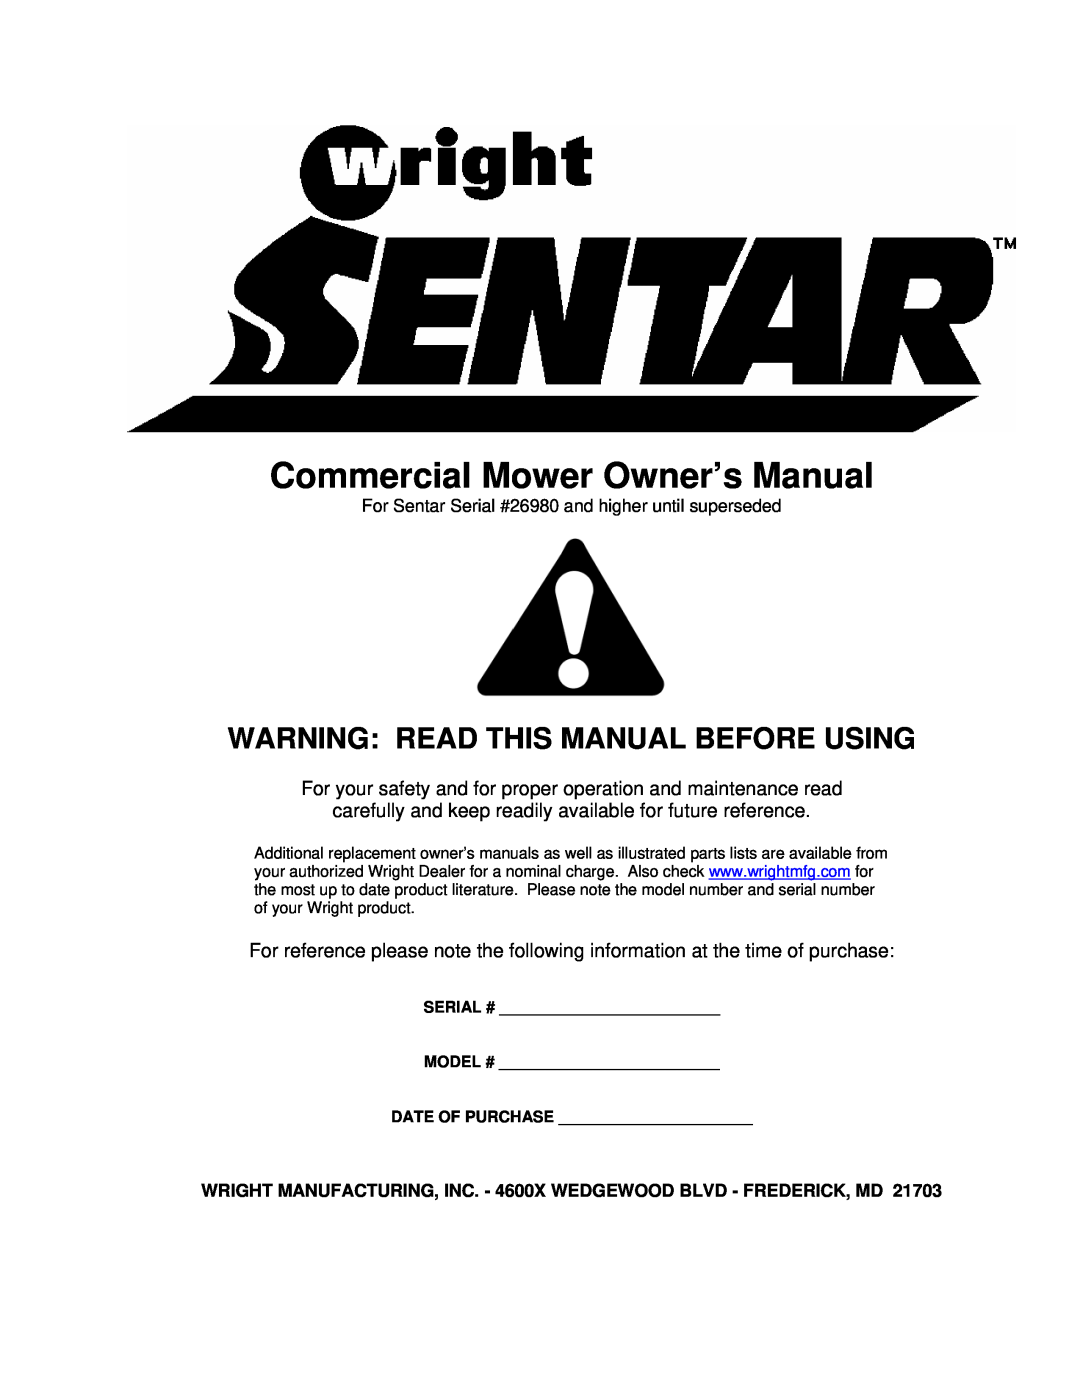 Wright Manufacturing 26980 owner manual Warning Read This Manual Before Using 